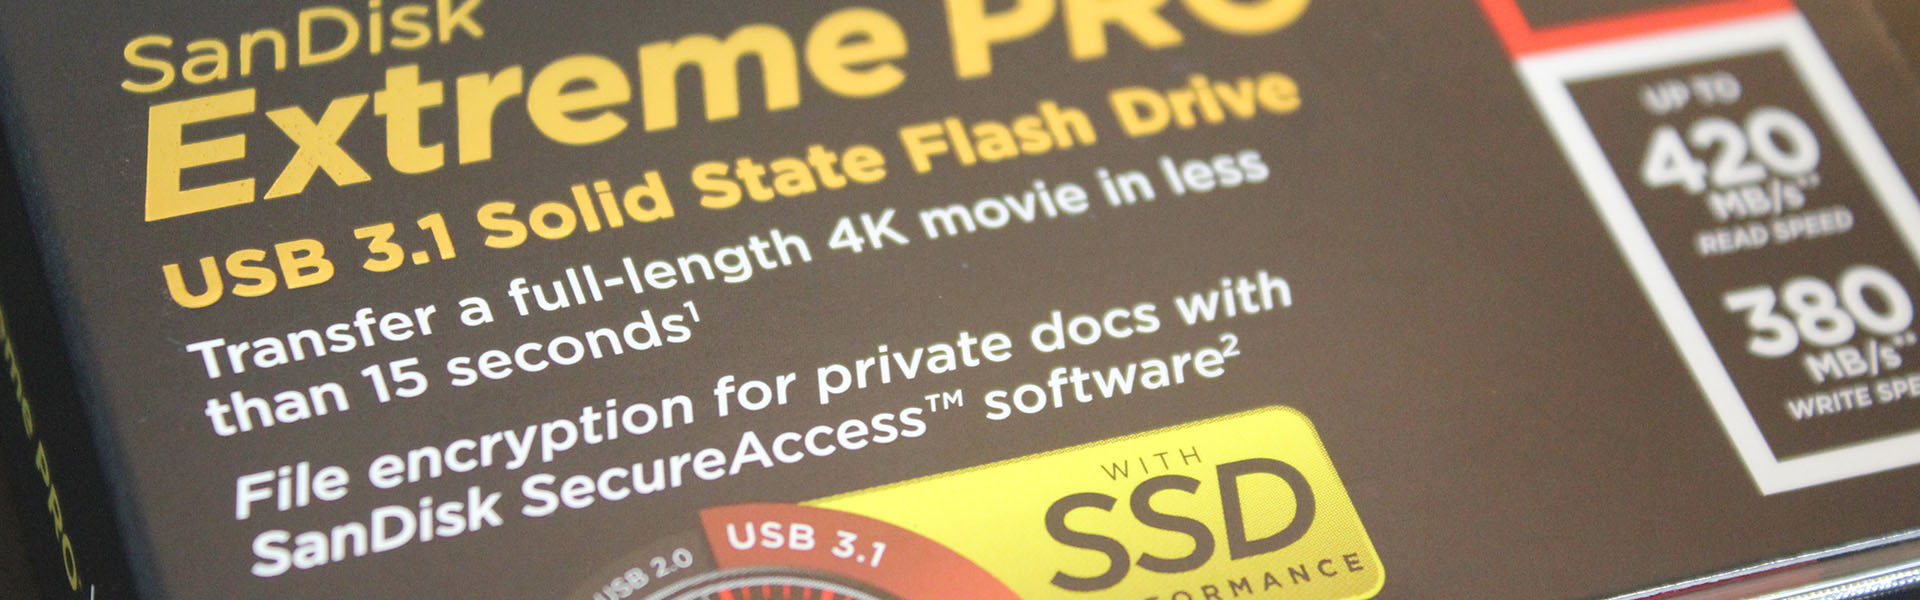 SanDisk Extreme Pro USB 3.1 Review 14